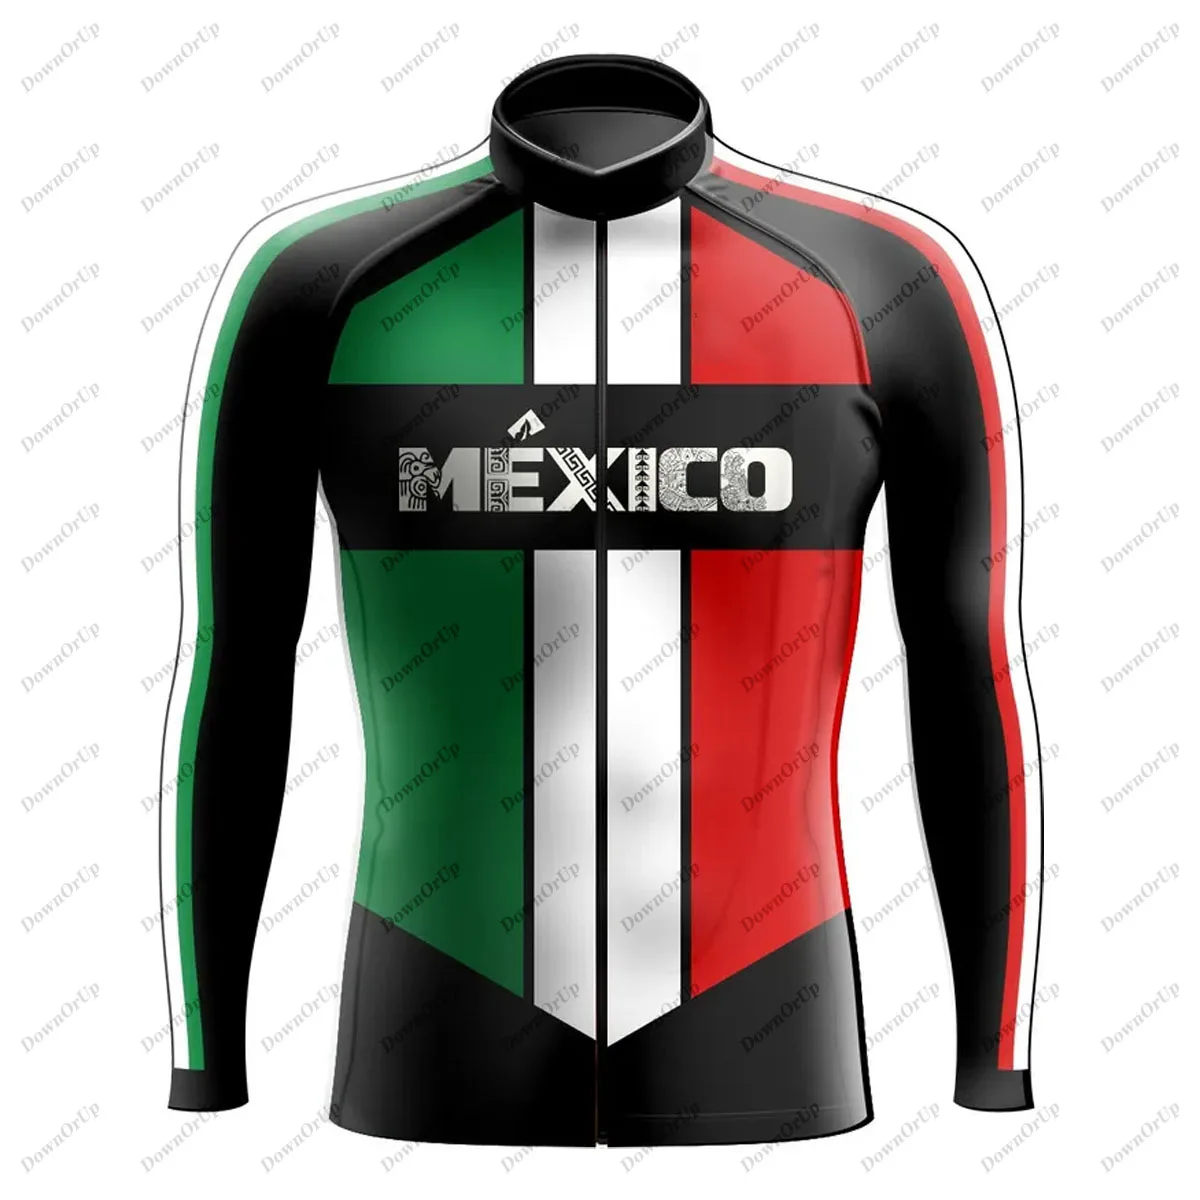 Mexico Aztec Men's Long Sleeve Cycling Jersey Maillot Ciclismo Hombre  Equipment BIke Clothing ropa ciclismo hombre invierno - AliExpress